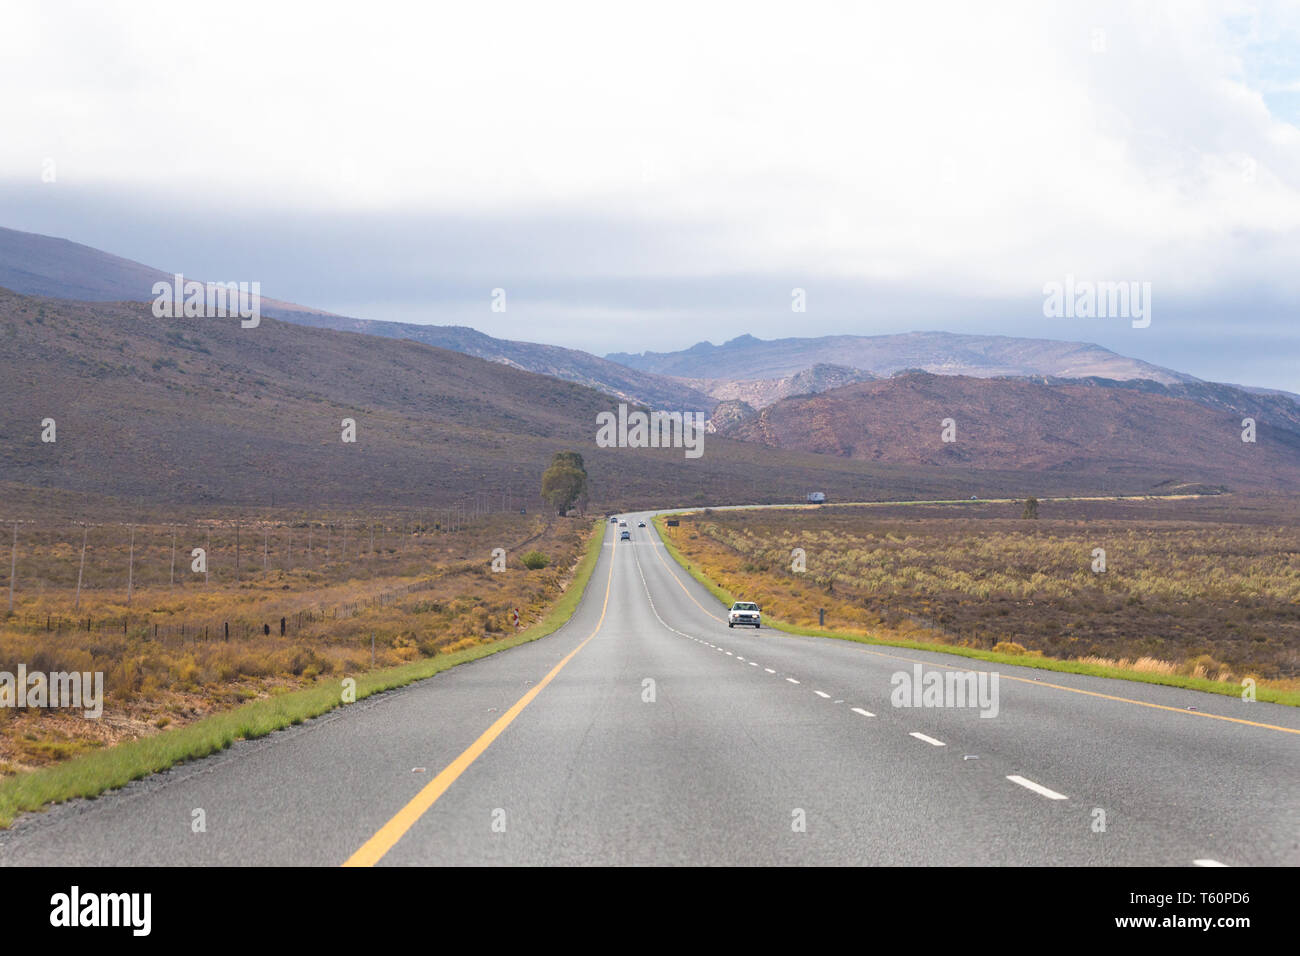 long tarred road stretching into the distance of the arid semi desert region of the Karoo in South Africa on a grey and cloudy Autumn or Fall day Stock Photo